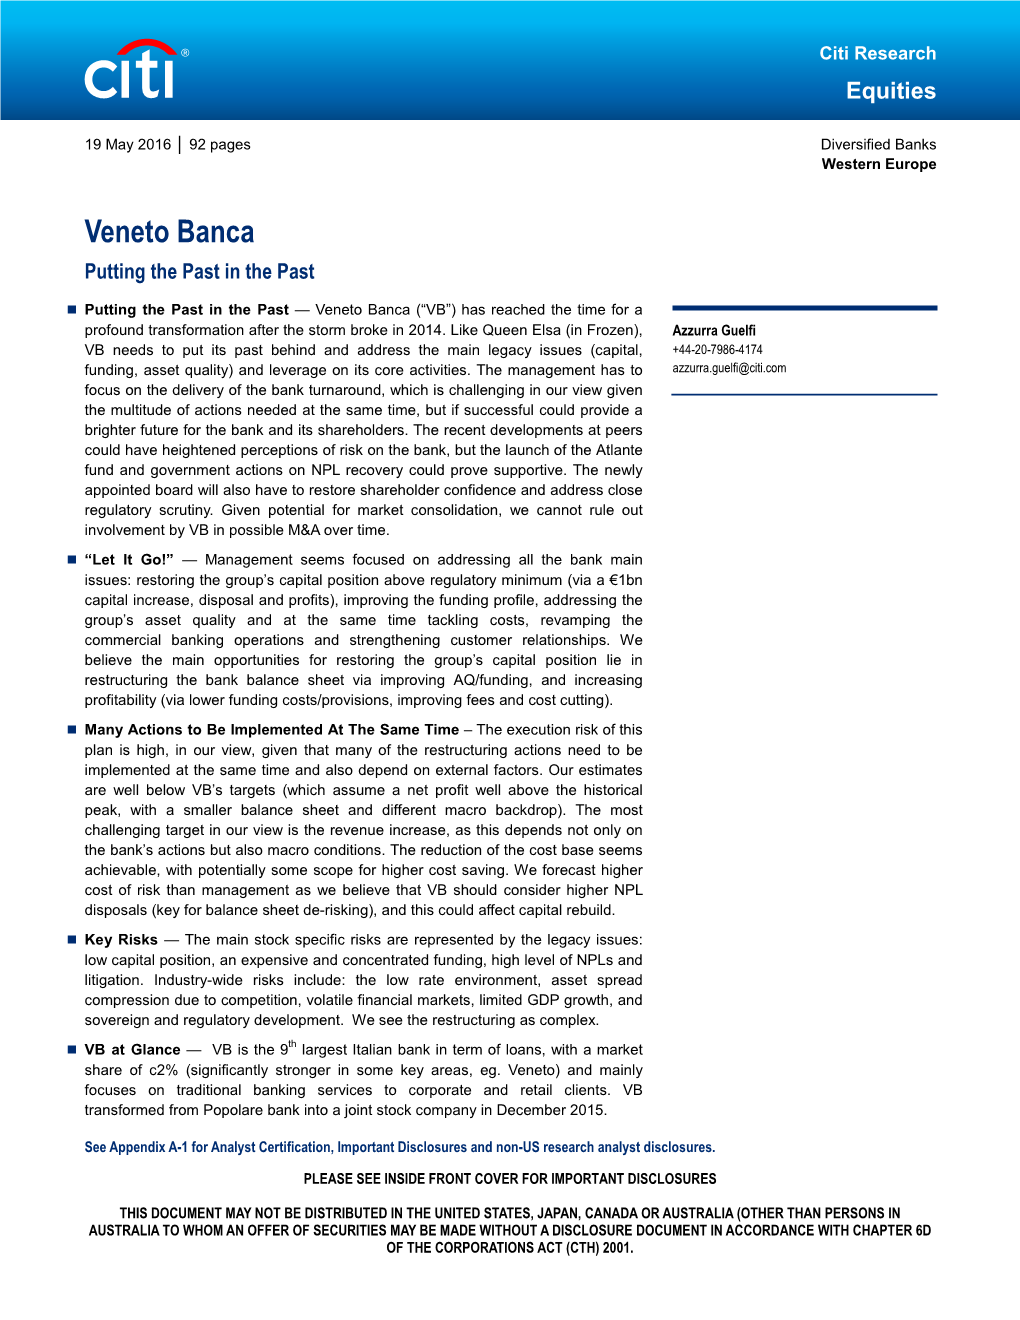 Veneto Banca Putting the Past in the Past